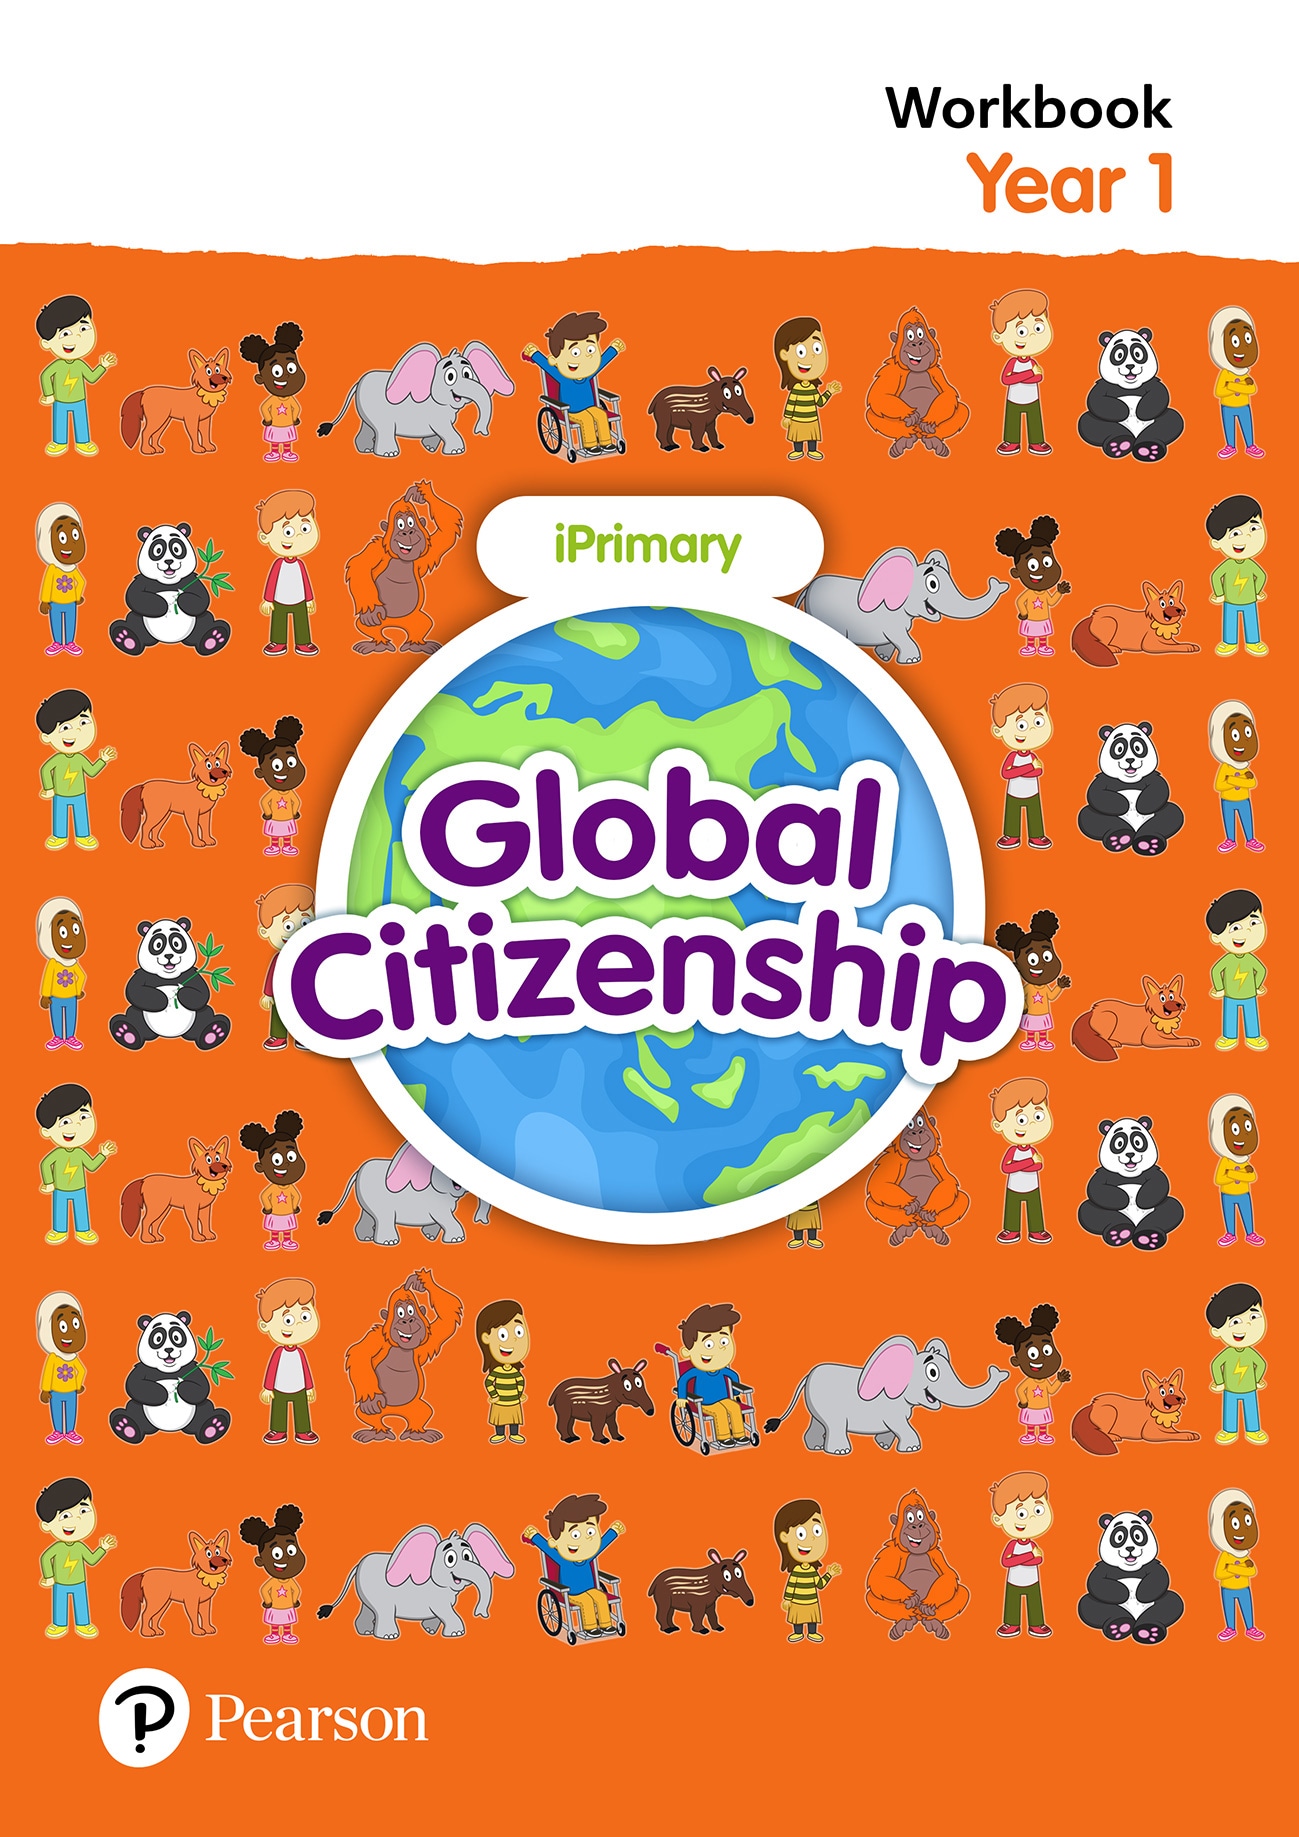 iPrimary Global Citizenship sample